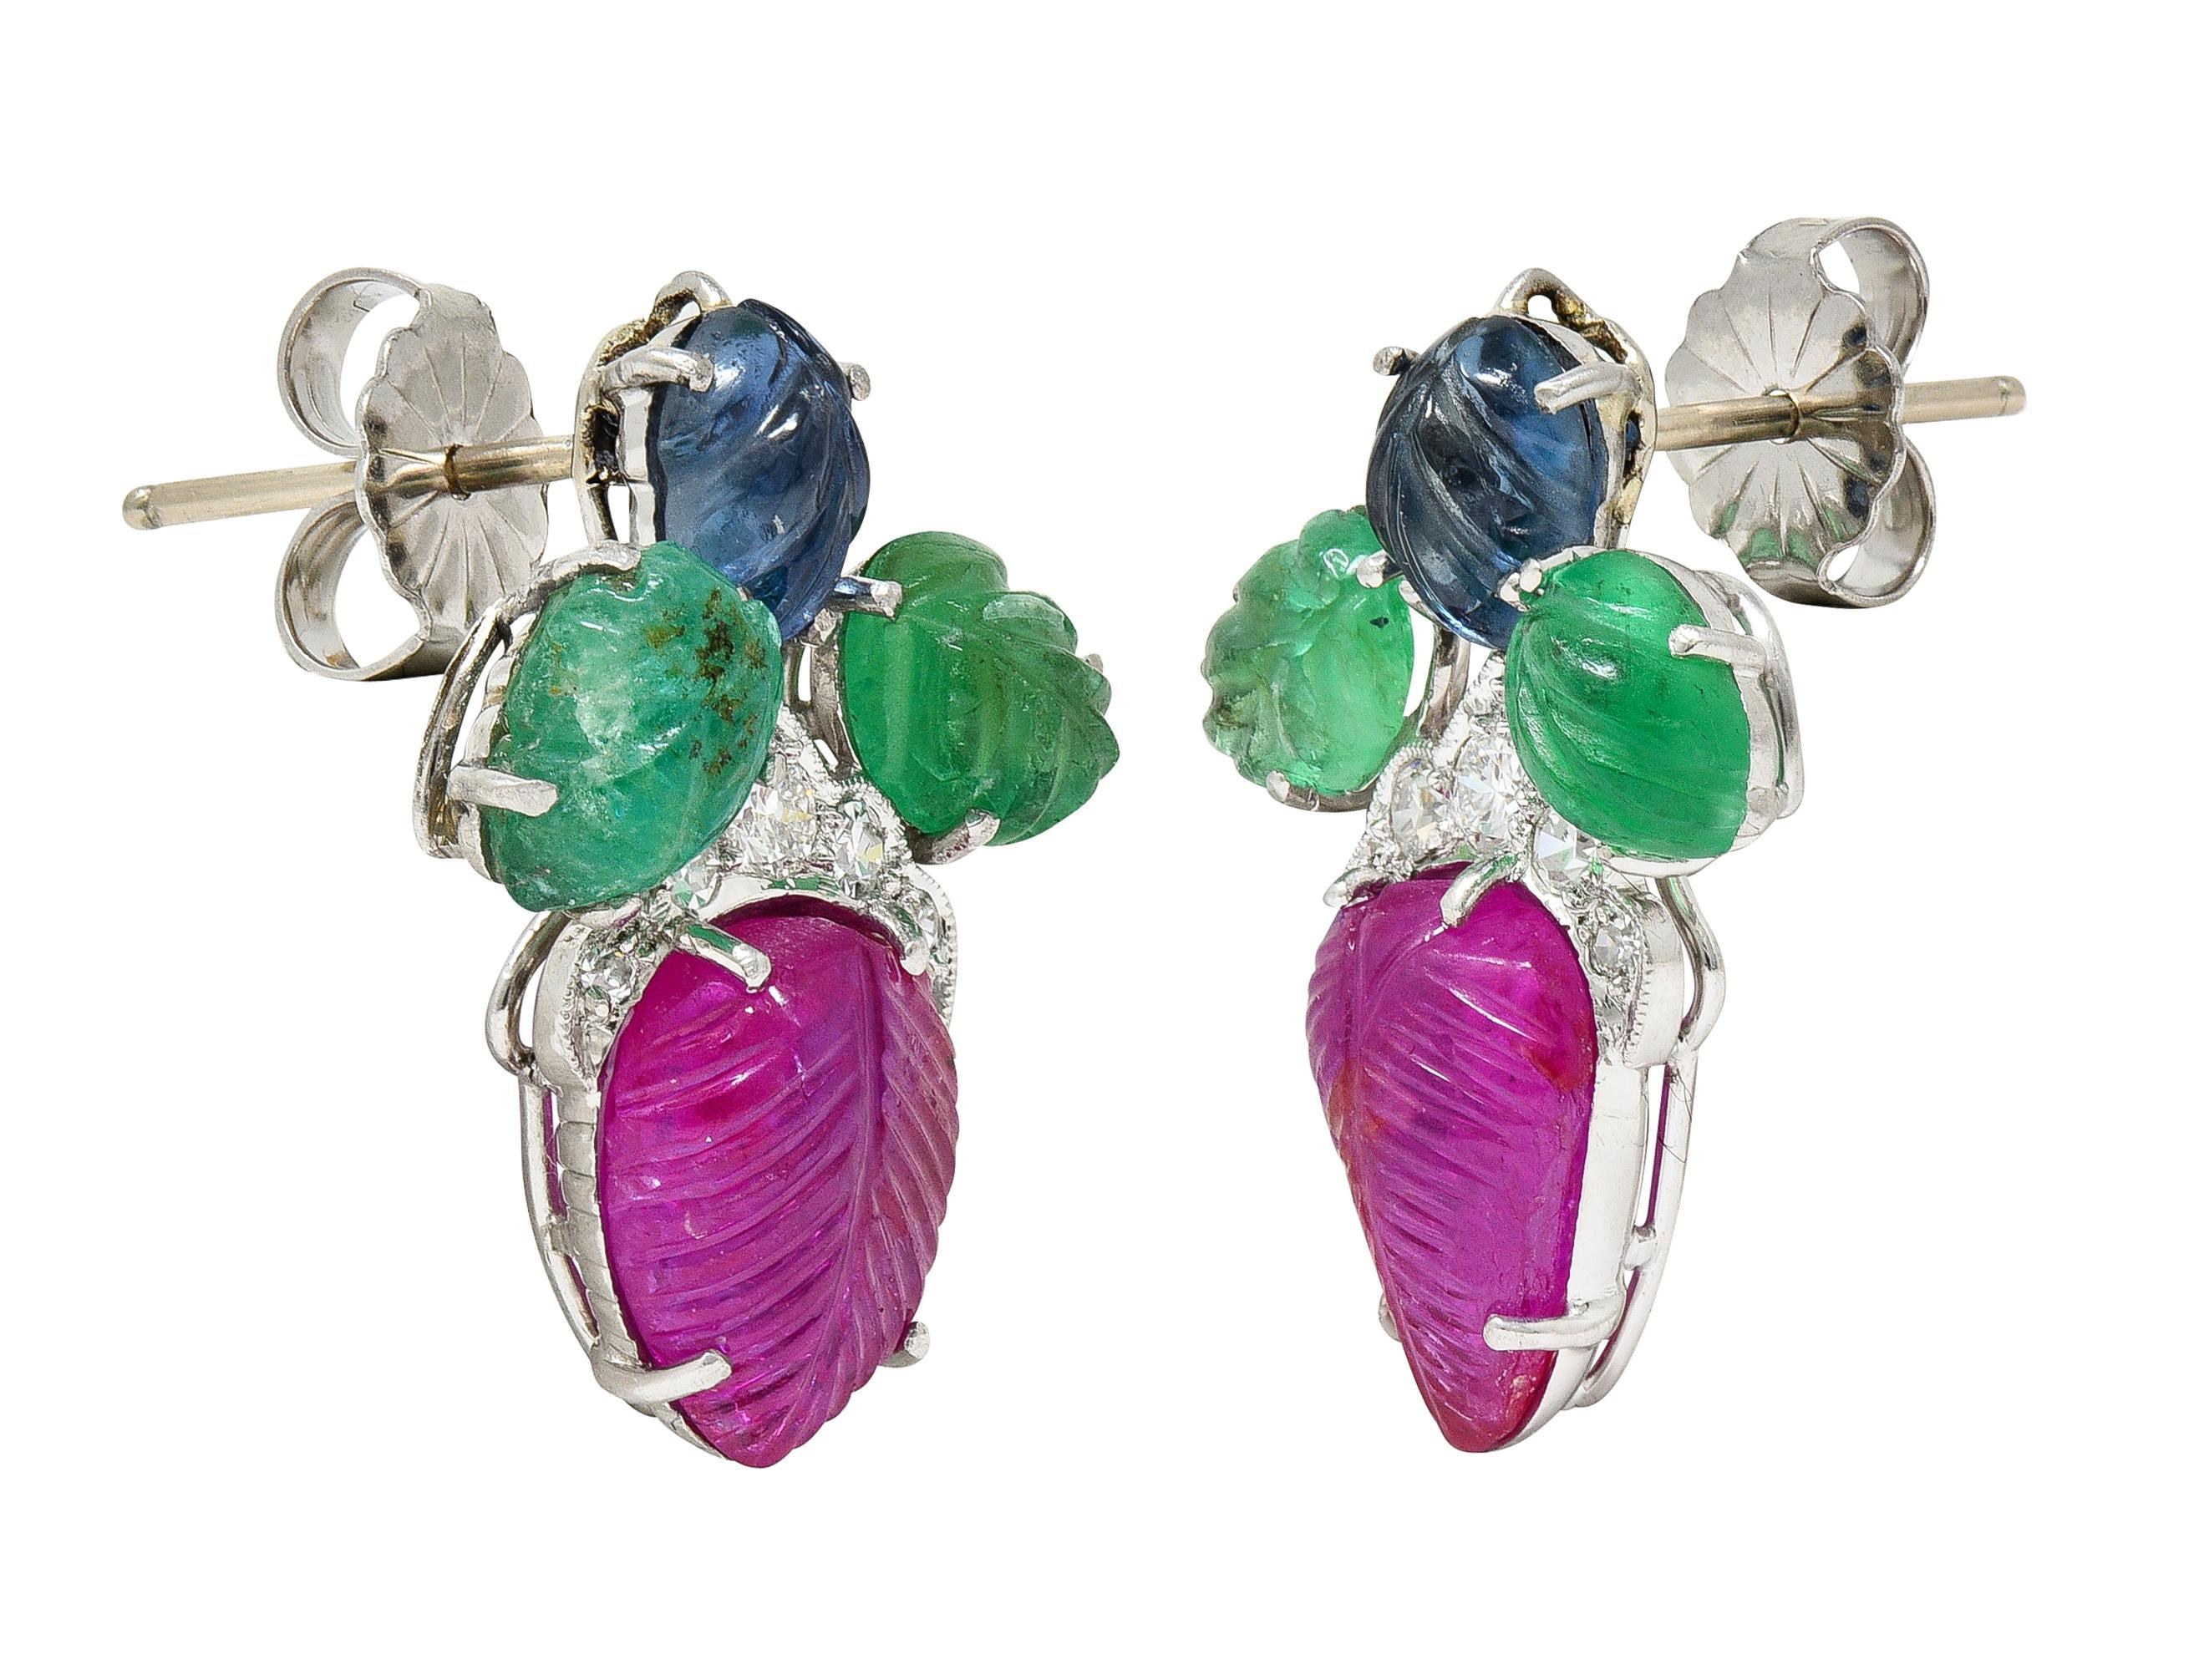 Designed as foliate motif surmounts and drops featuring clustered gemstones
Comprised of prong set and carved foliate motif rubies, emeralds, and sapphires
Rubies weigh approximately 3.28 carats - transparent medium purplish red
Emeralds weigh